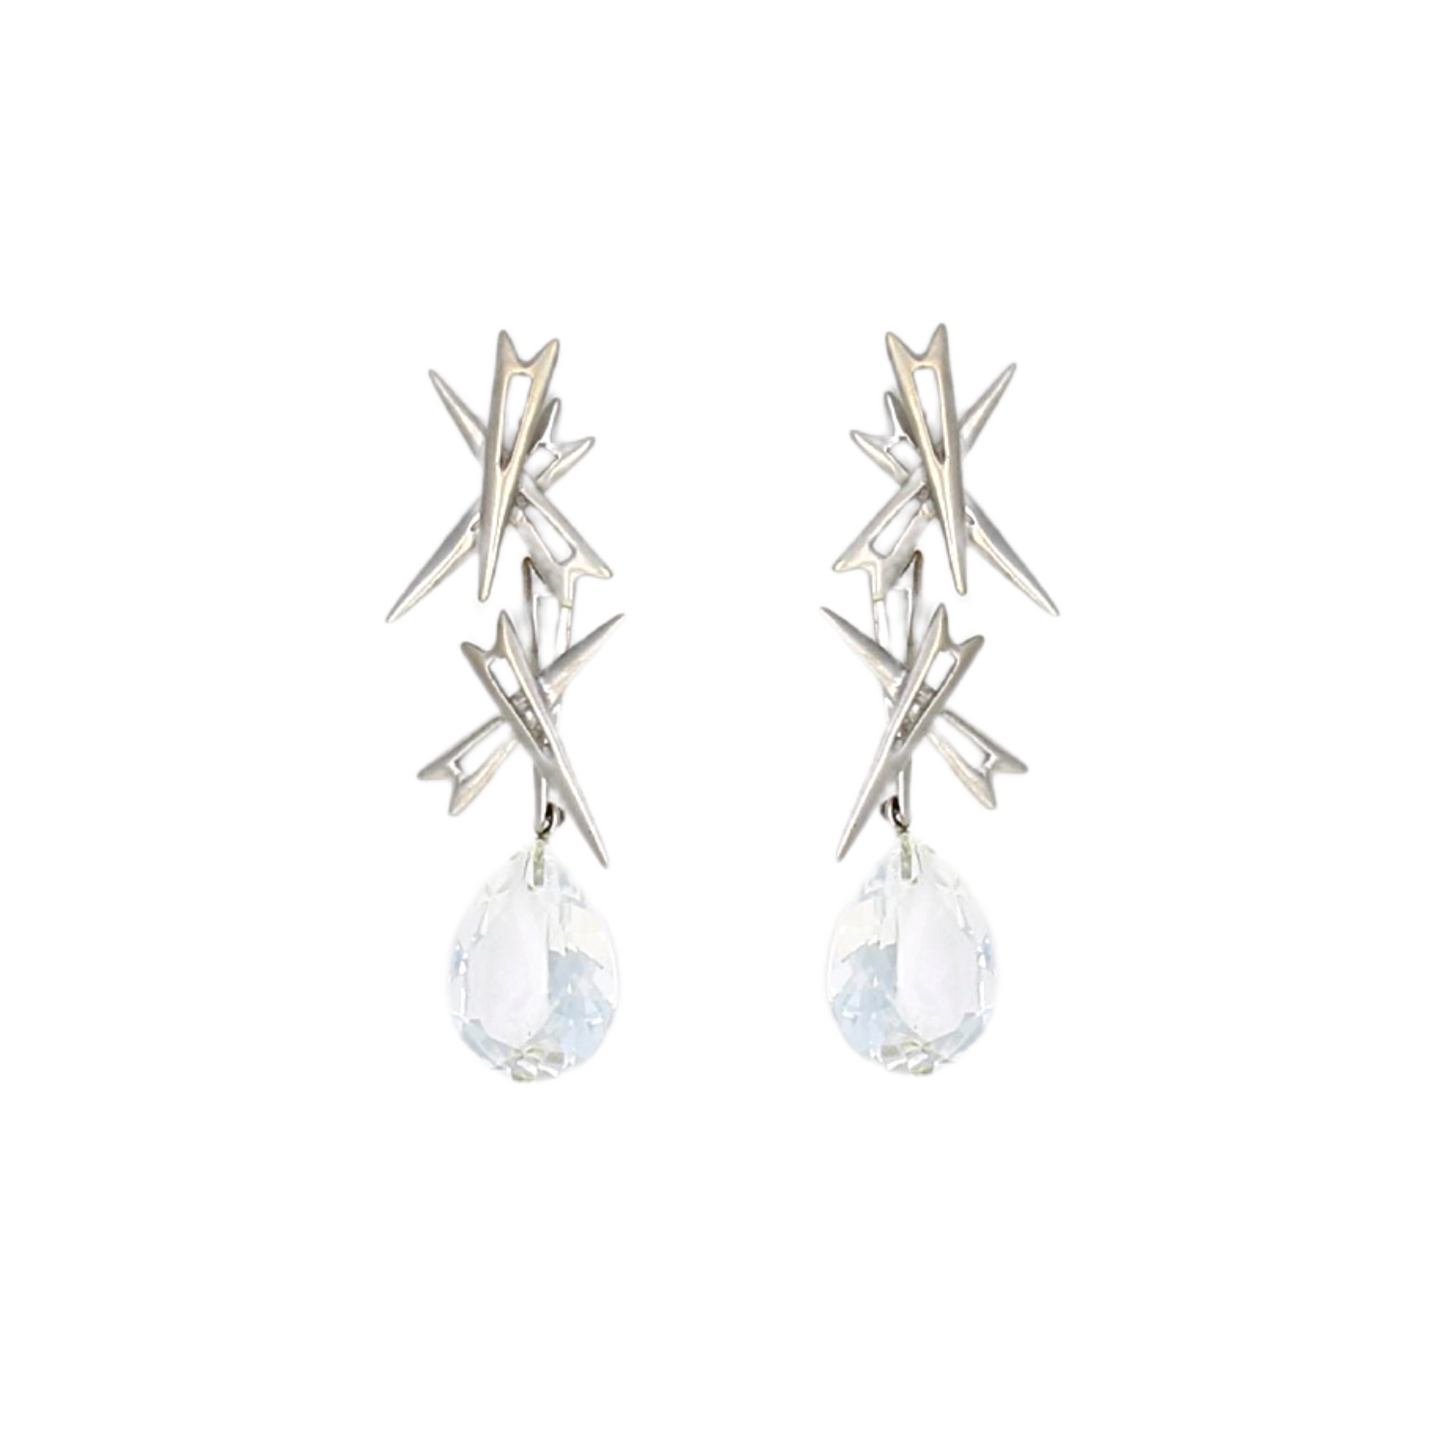 Double Twinkle Earrings with White Topaz